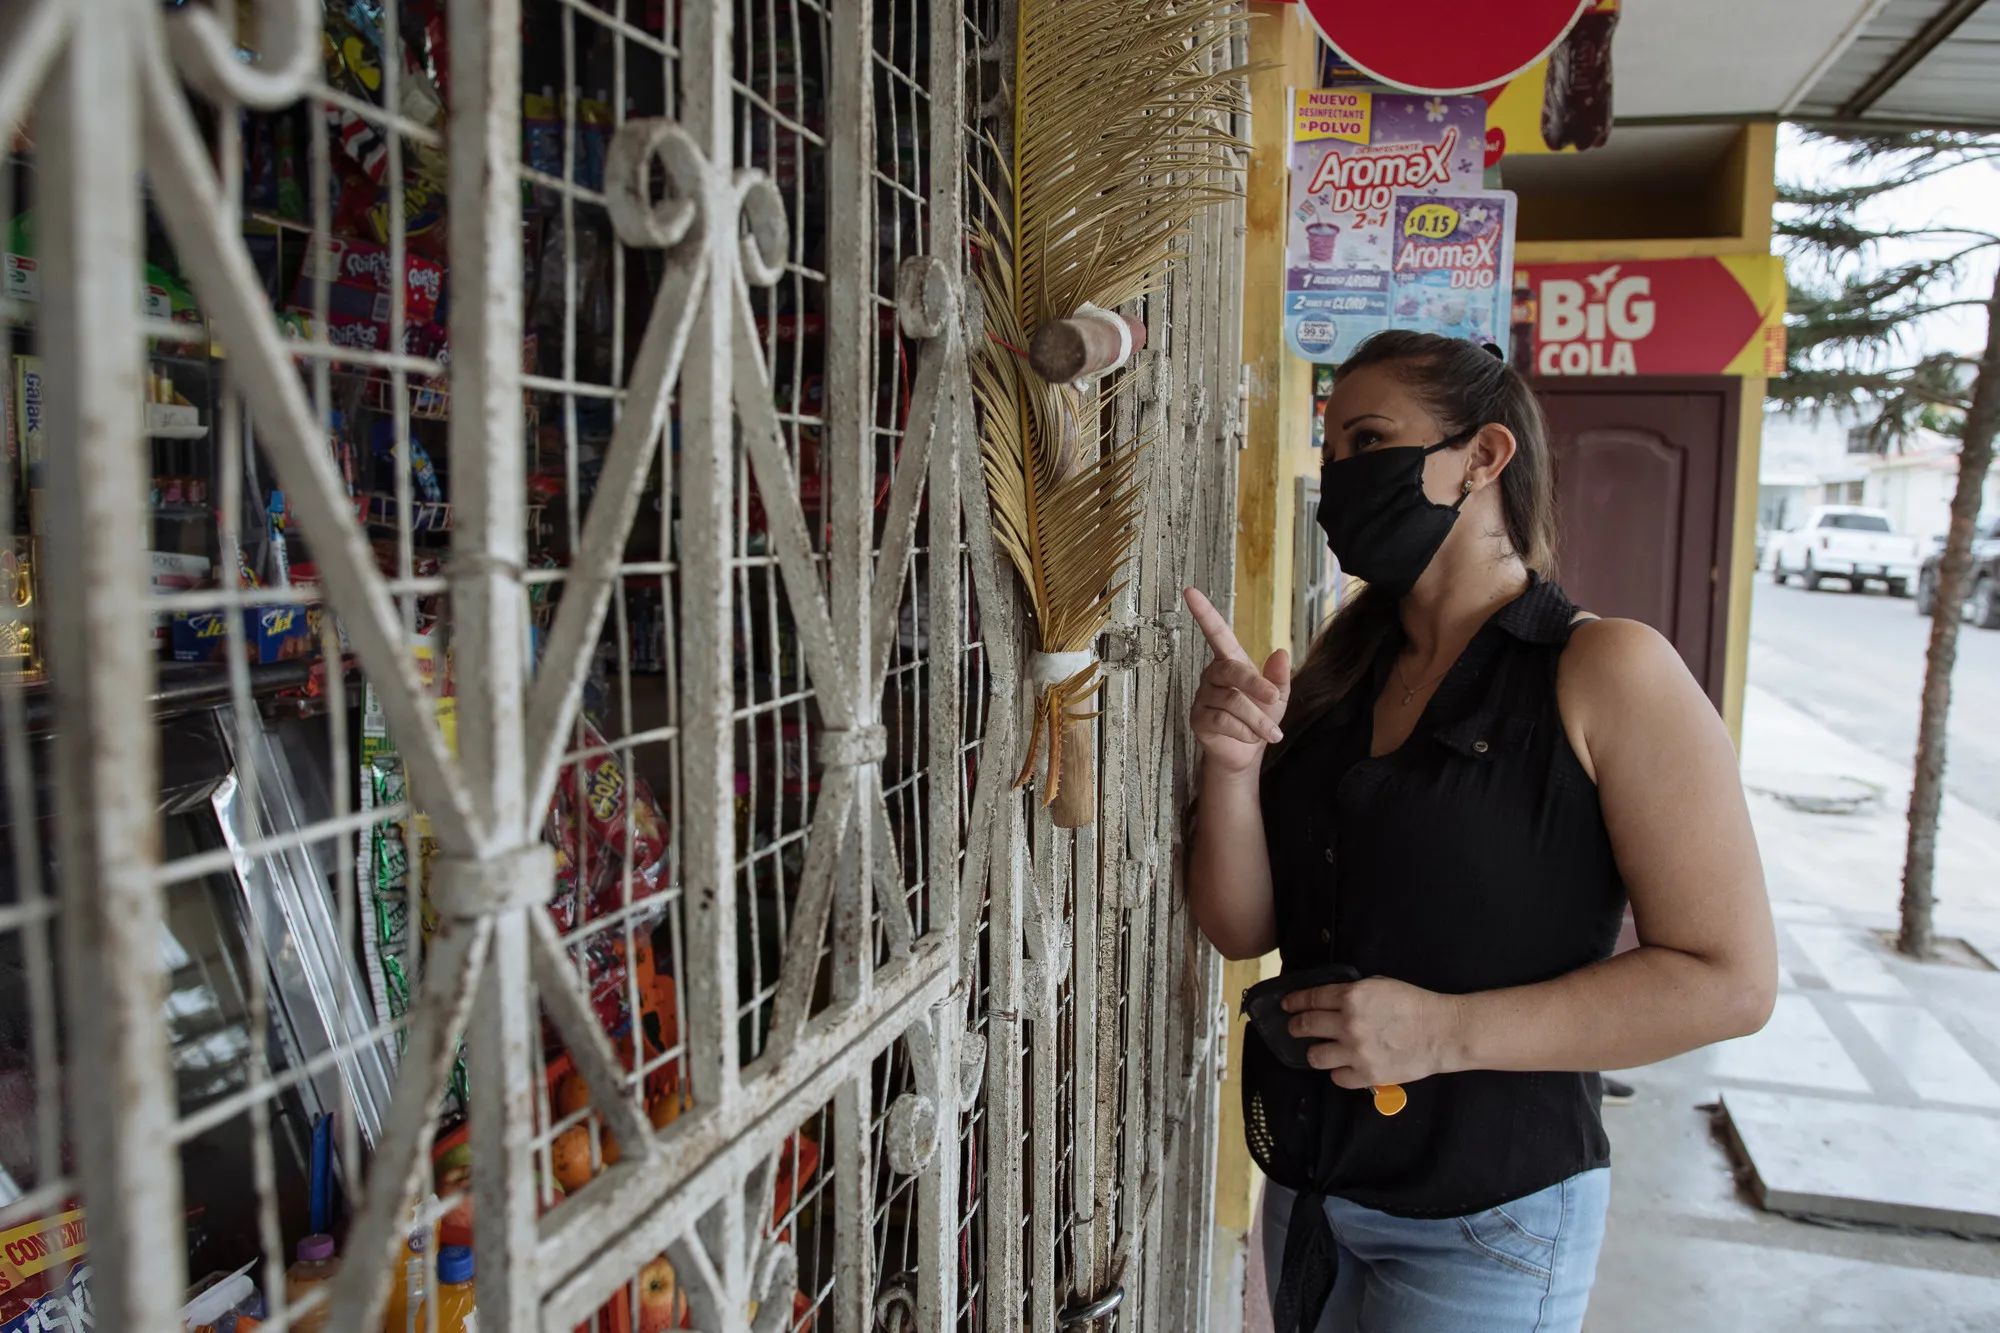 A woman in a face mask stands outside of a small store in a city.